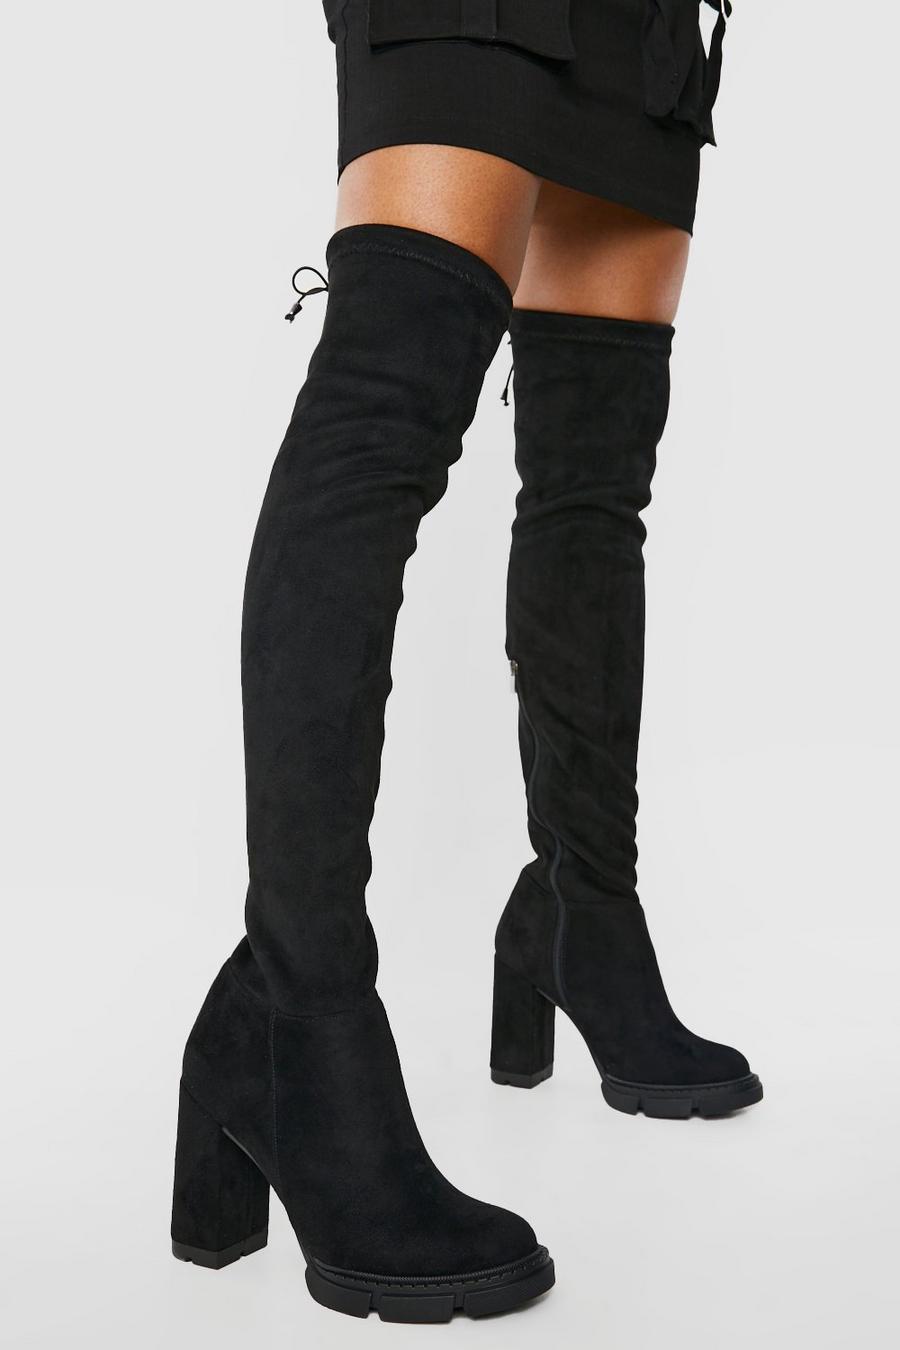 Black Cleated Platform Stretch Over The Knee Boots